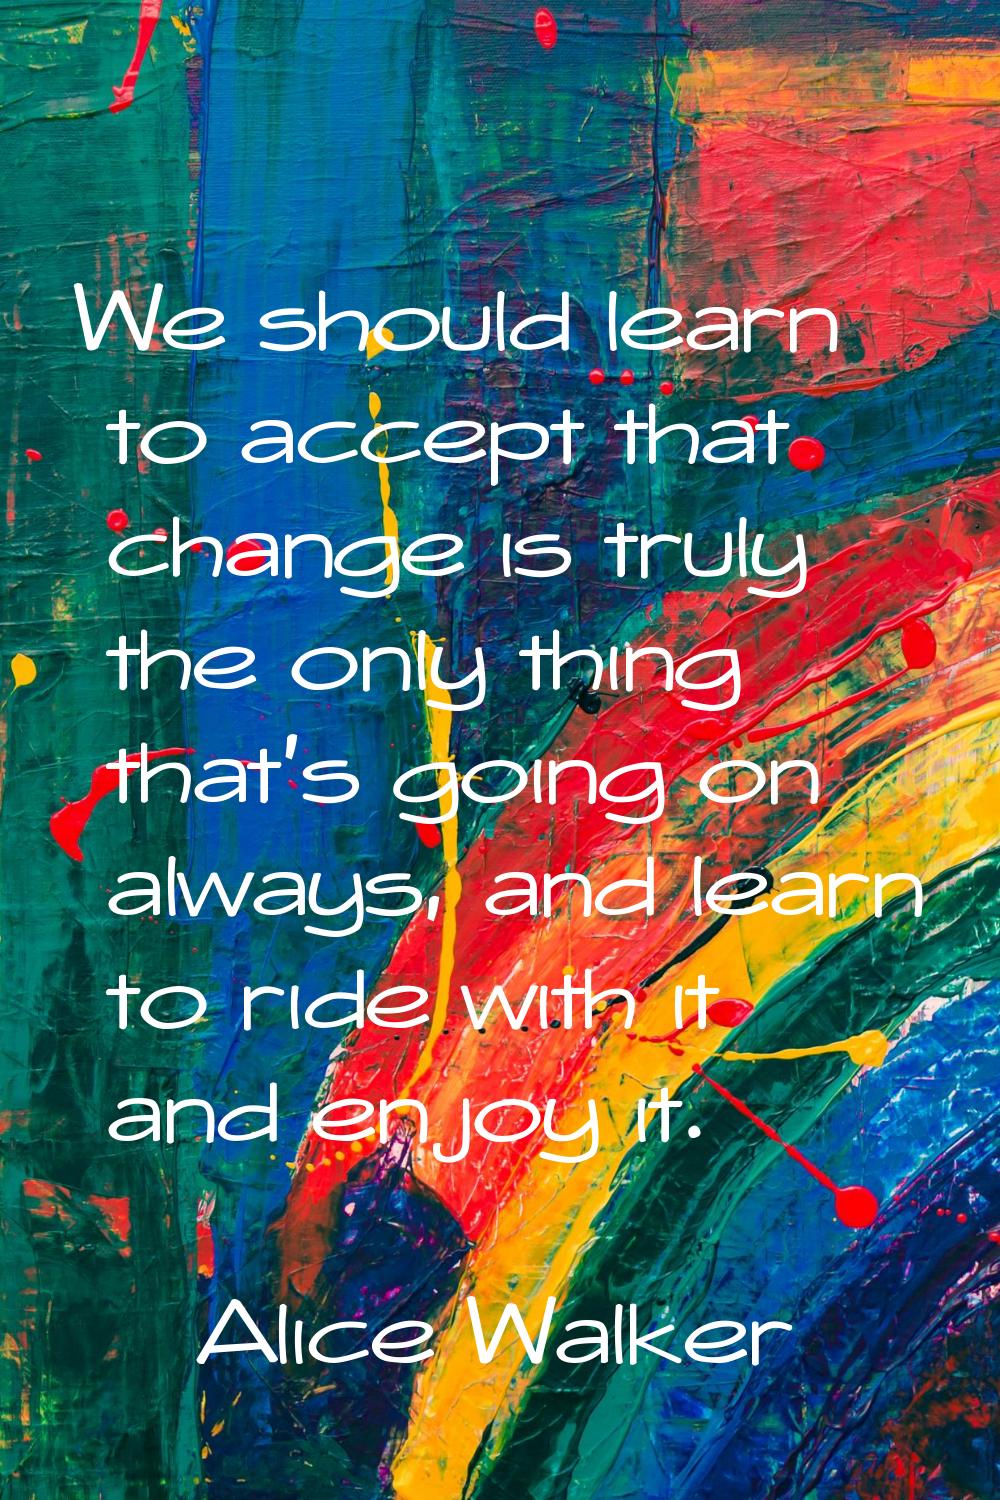 We should learn to accept that change is truly the only thing that's going on always, and learn to 